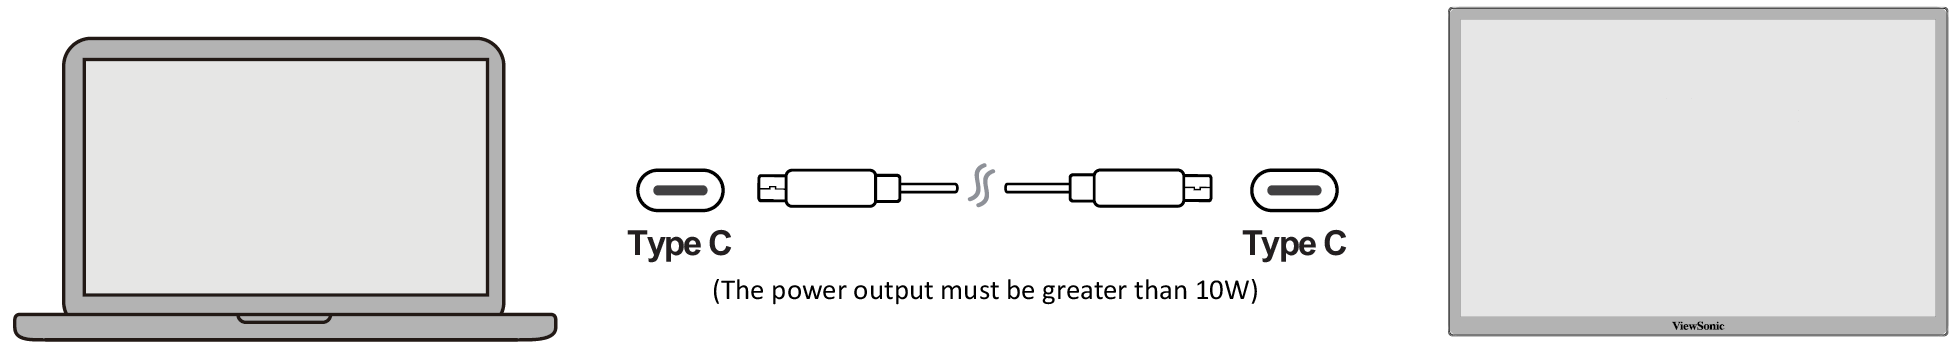 Type C Connection